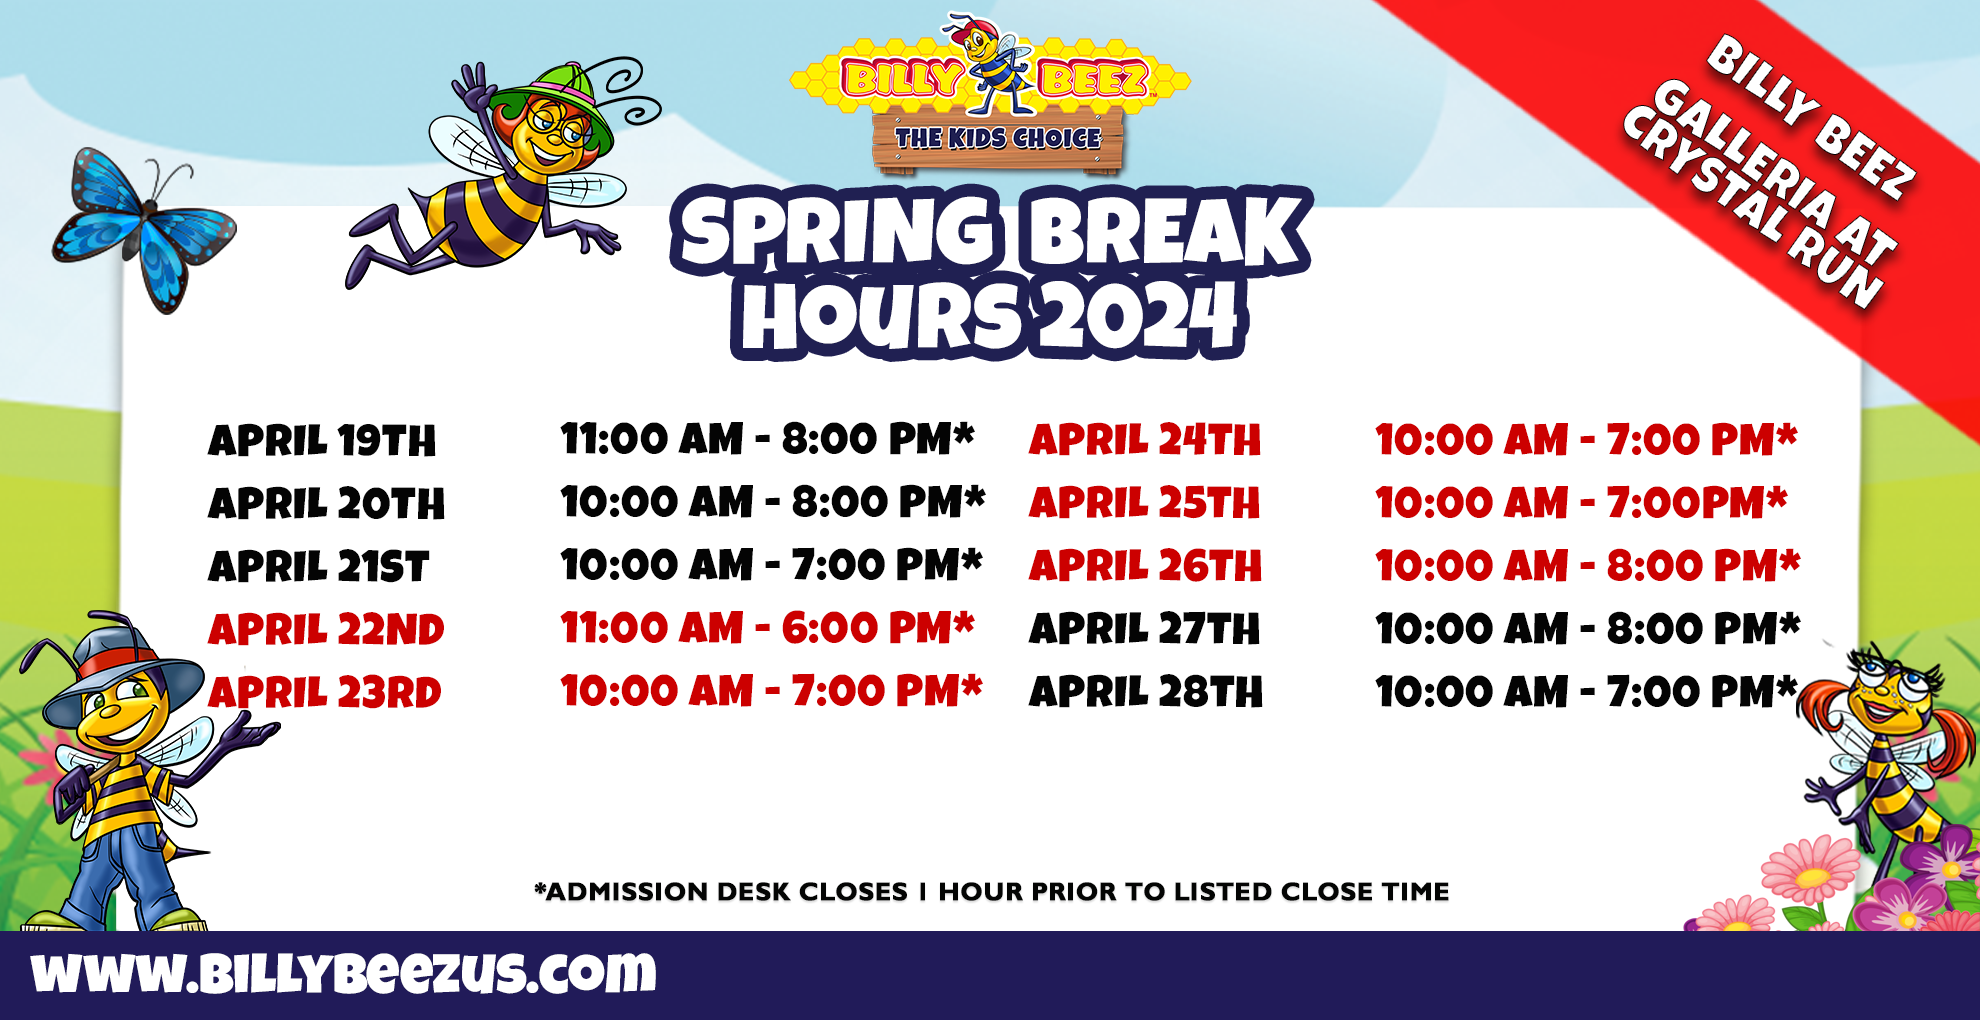 Billy Beez The Kids Place Billy Beez Galleria at Crystal Run Spring Break Hours 2024 April 19th 11:00am-8:00am* April 20th 10:00am-8:00pm* April 21st 10:00am-7:00pm* April 22nd 11:00am-6:00pm* April 23rd 10:00am-7:00pm* April 24th 10:00am-7:00pm* April 25th 10:00am-7:00pm* April 26th 10:00am-8:00pm* April 27th 10:00am-8:00pm* April 28th 10:00am-7:00pm* *Admission desk closes 1 hour prior to listed close time